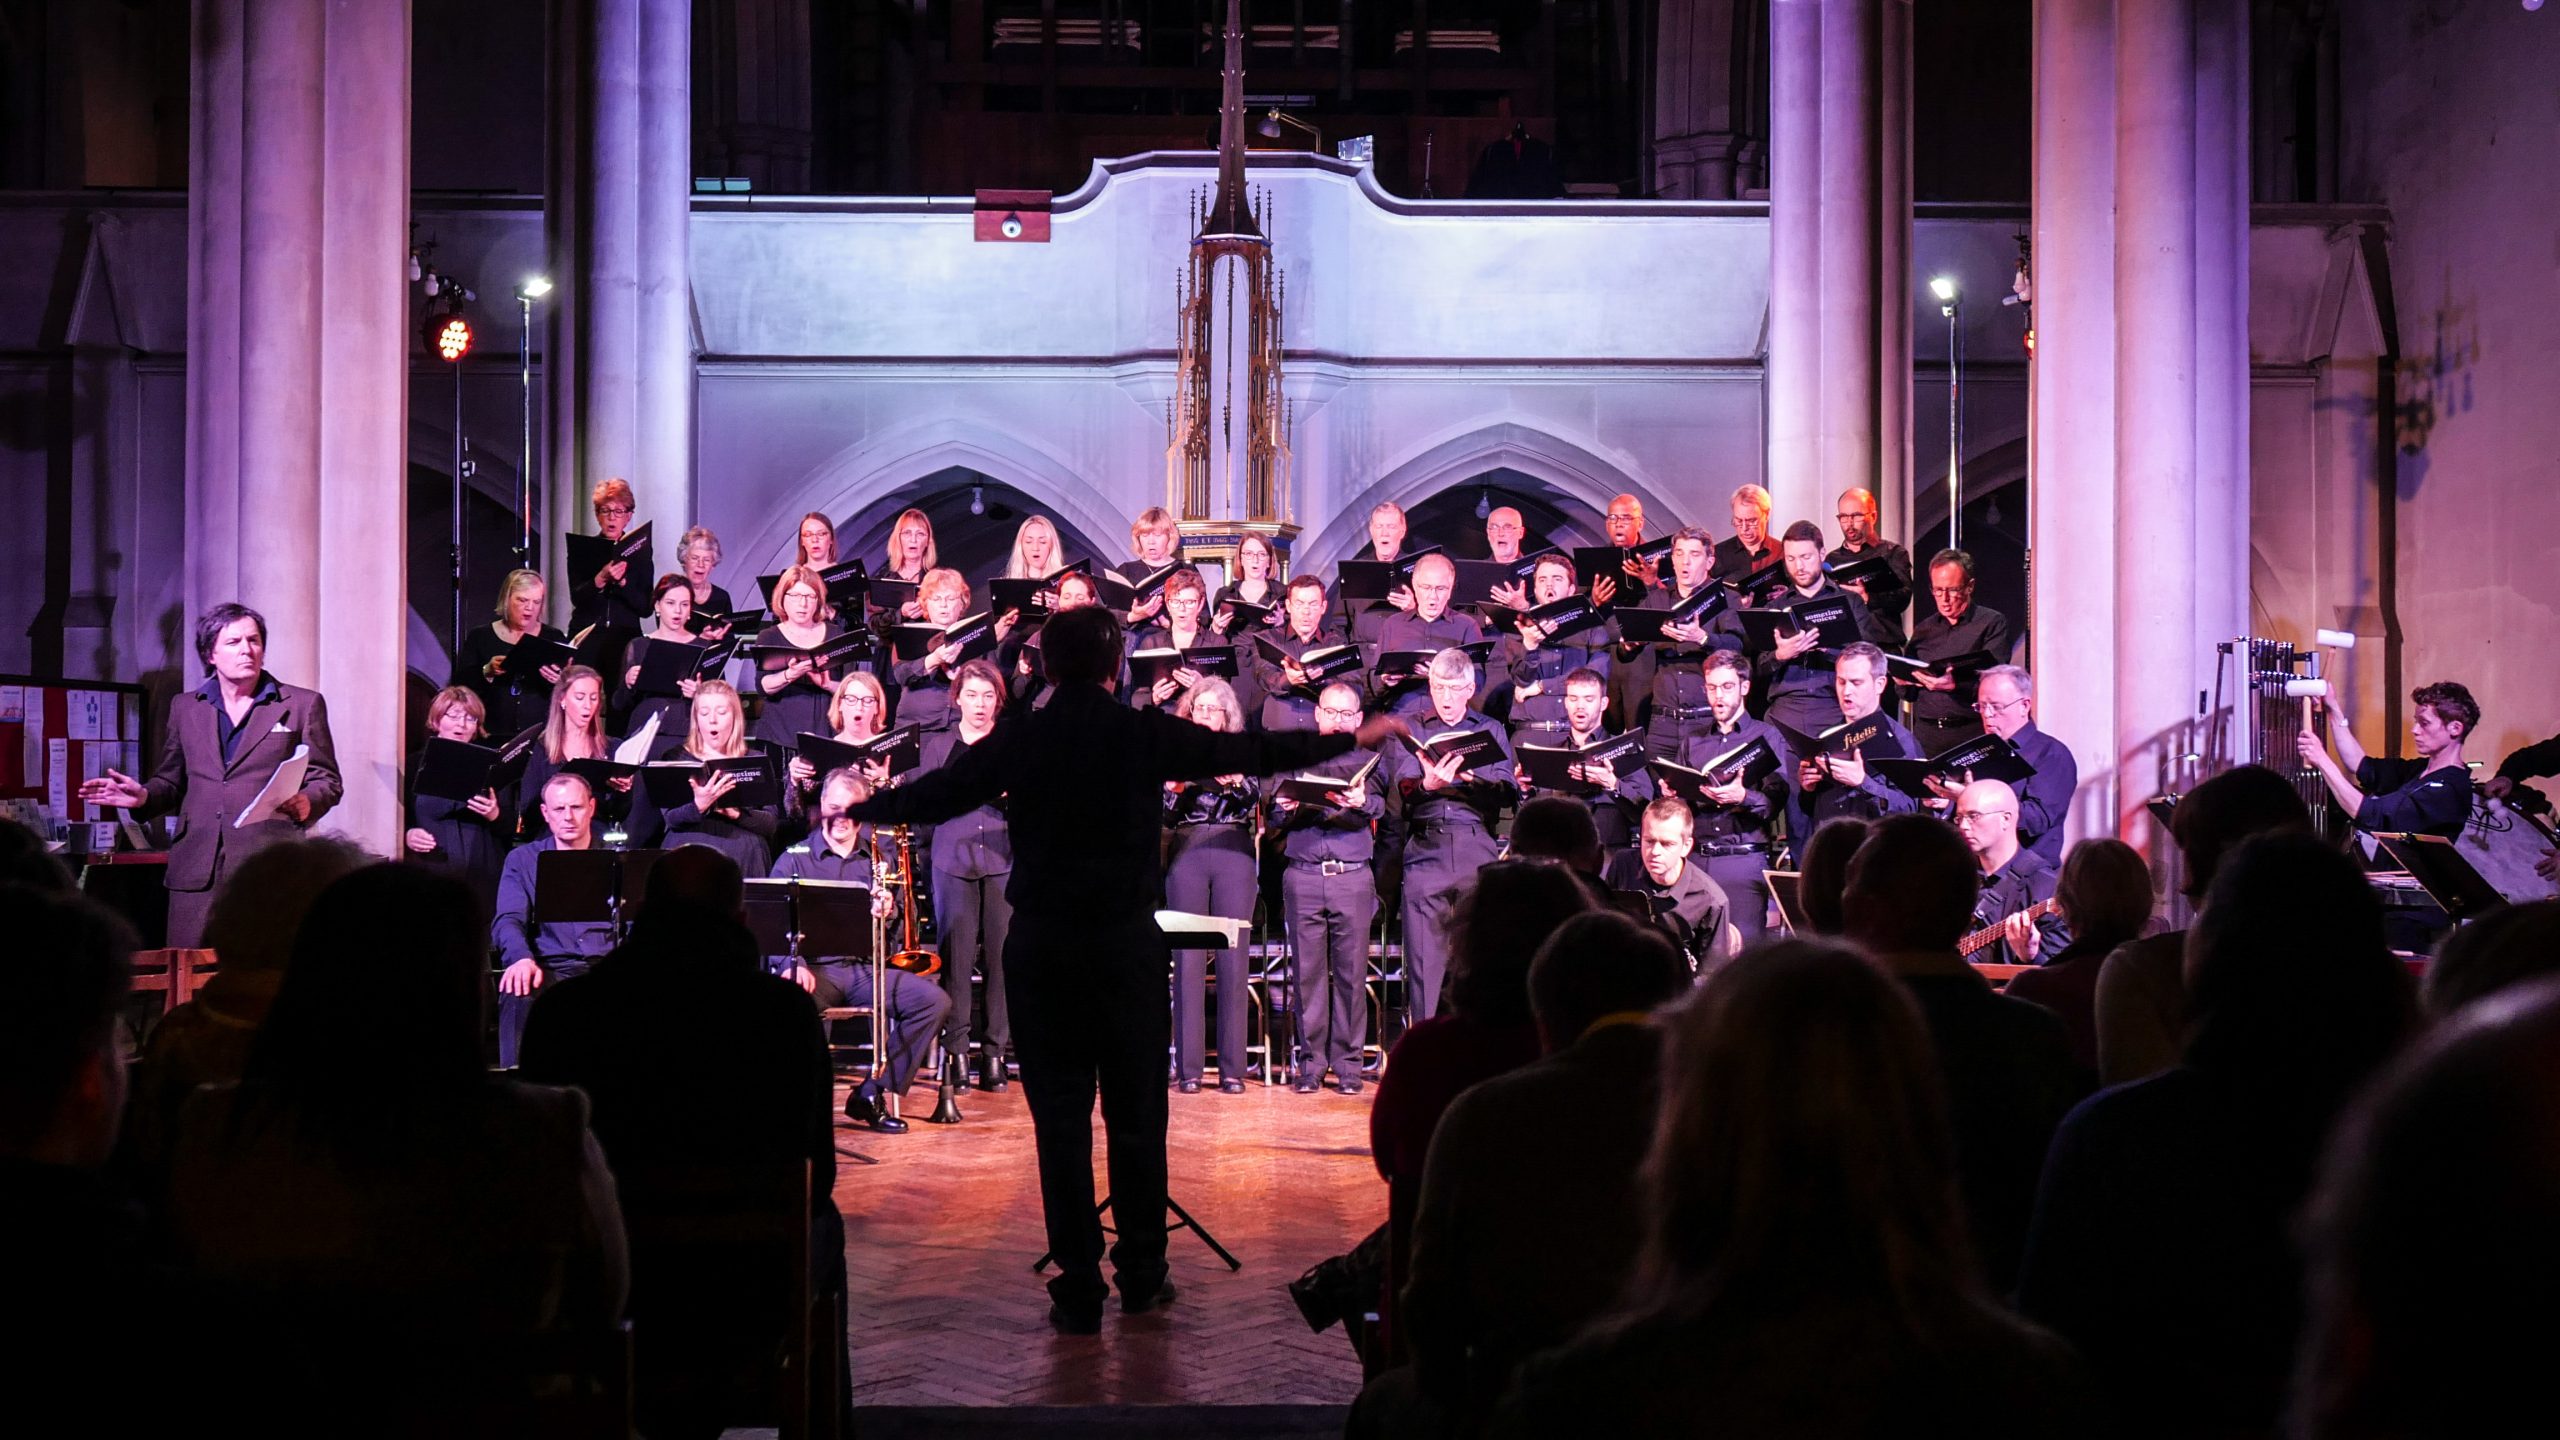 Visual aid: Choir and conductor at a classical music concert in a church in London - Pink light